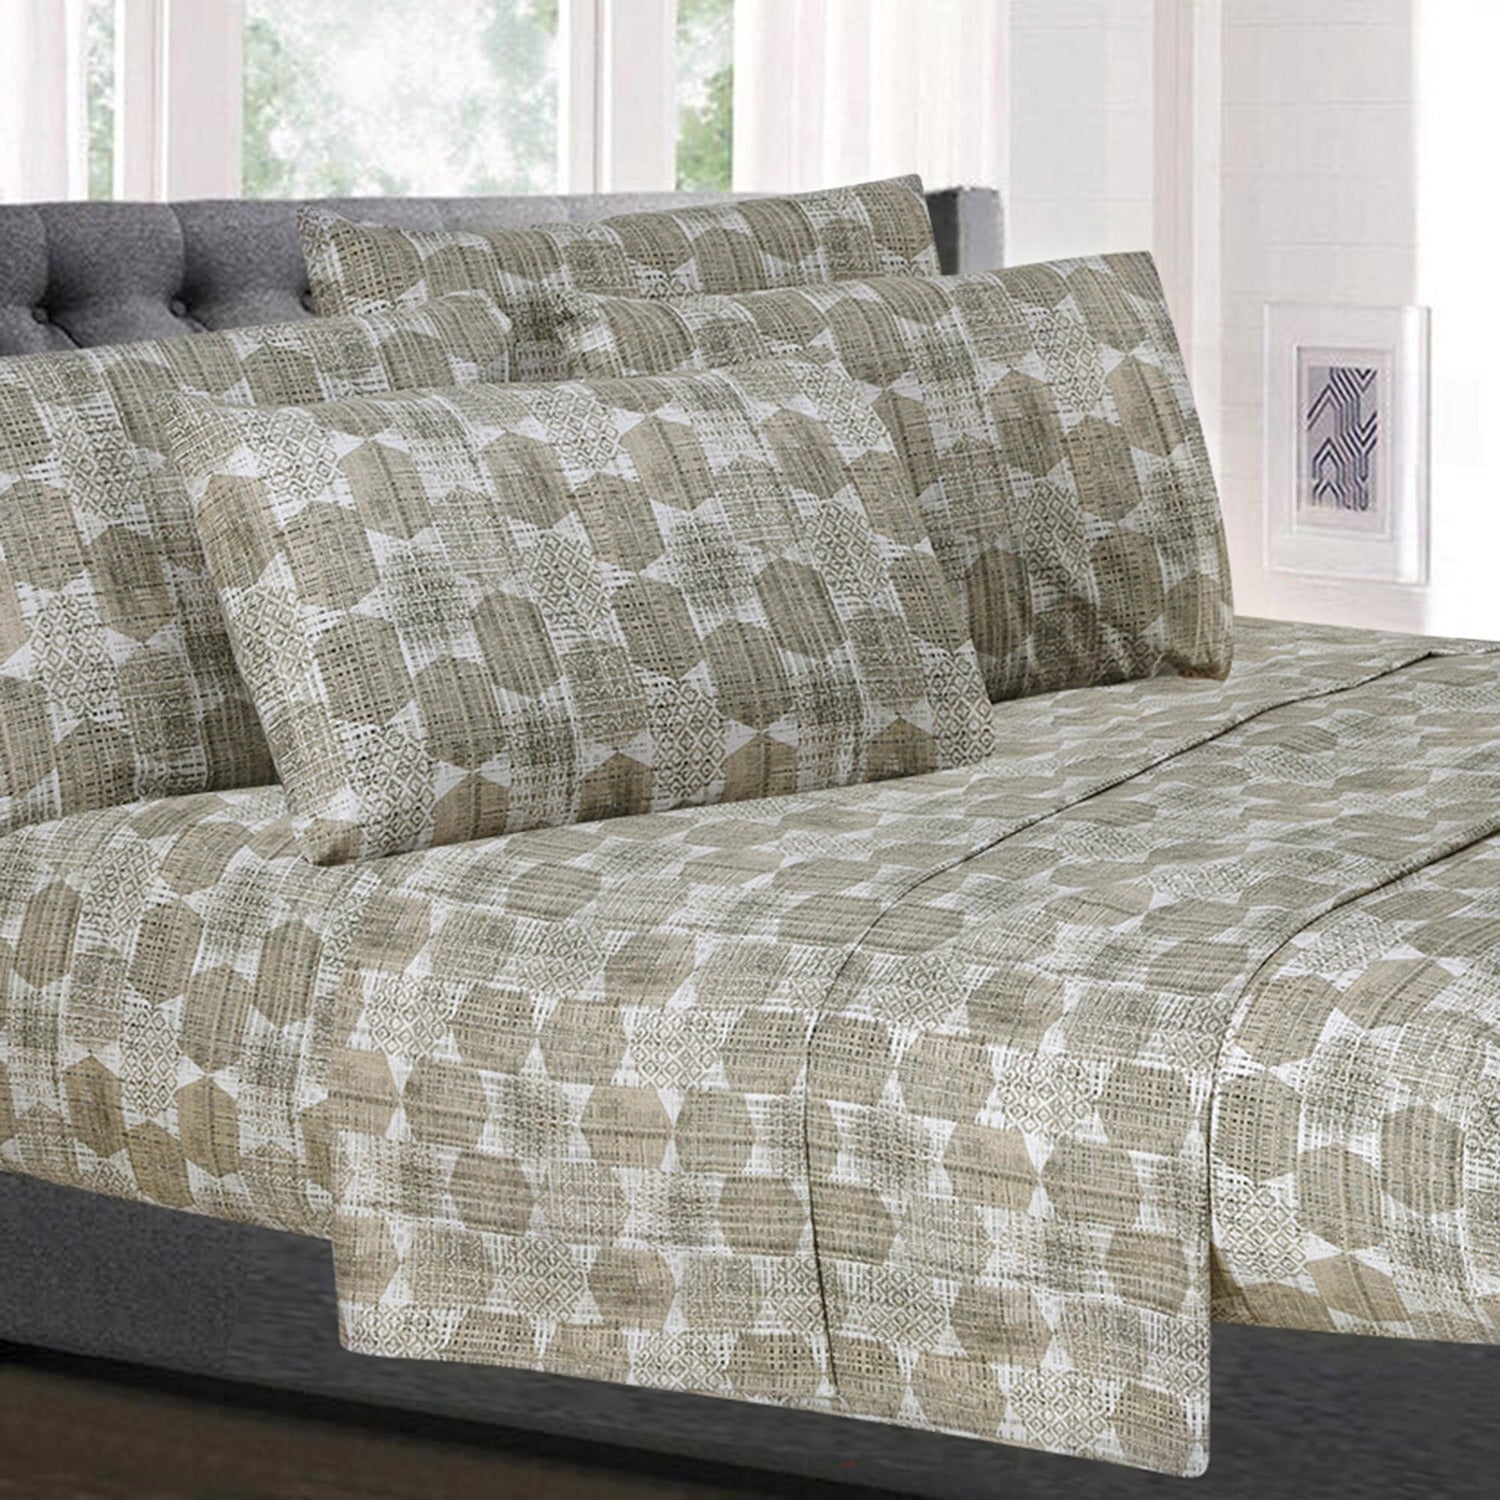 Deluxe 6-Piece Bed Sheet Set (Monaco Taupe) - Bed